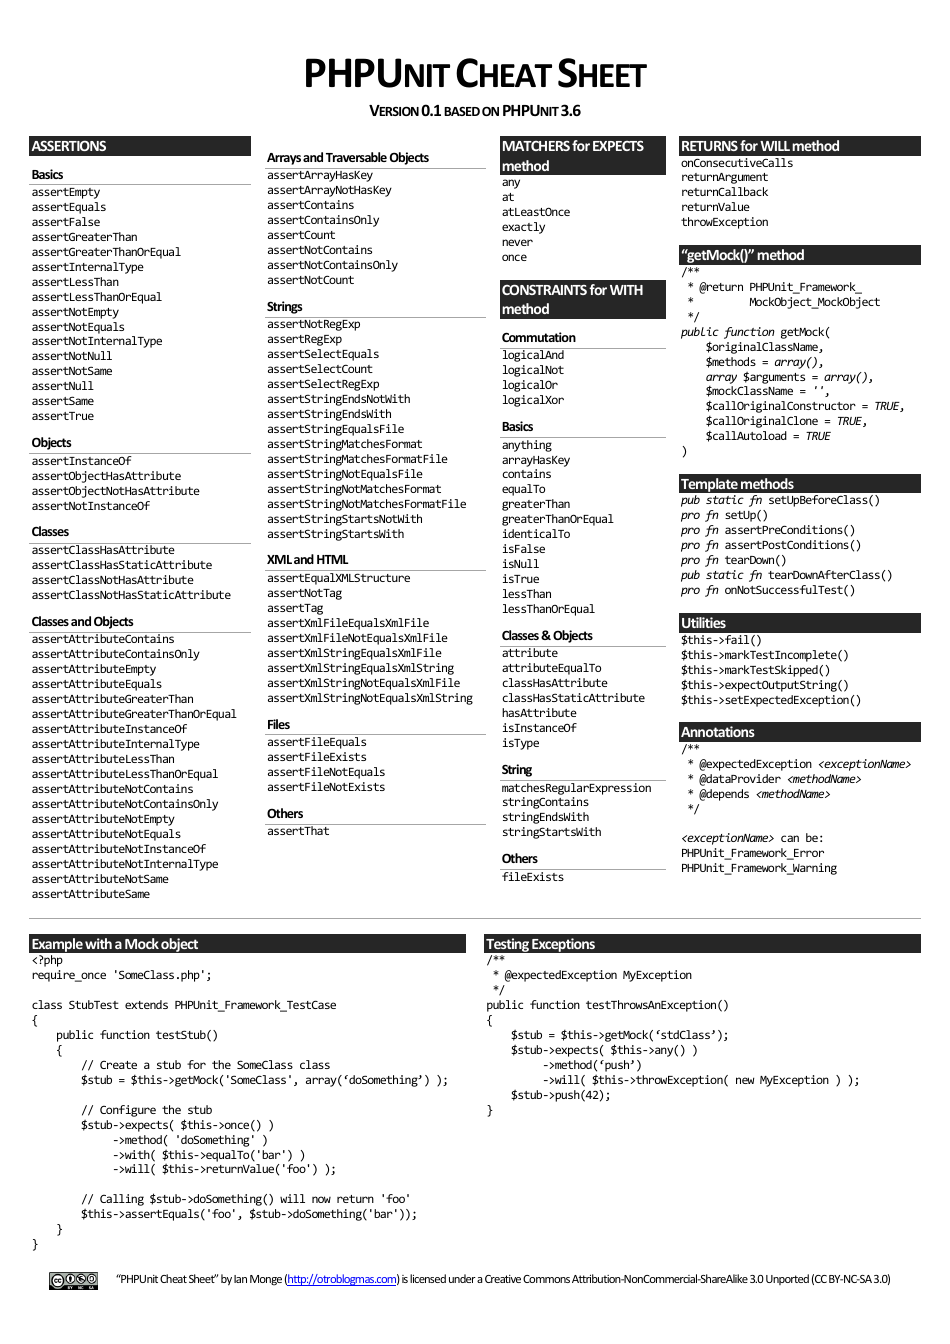 Recognize and understand key PHP Unit concepts with the help of this comprehensive cheat sheet.